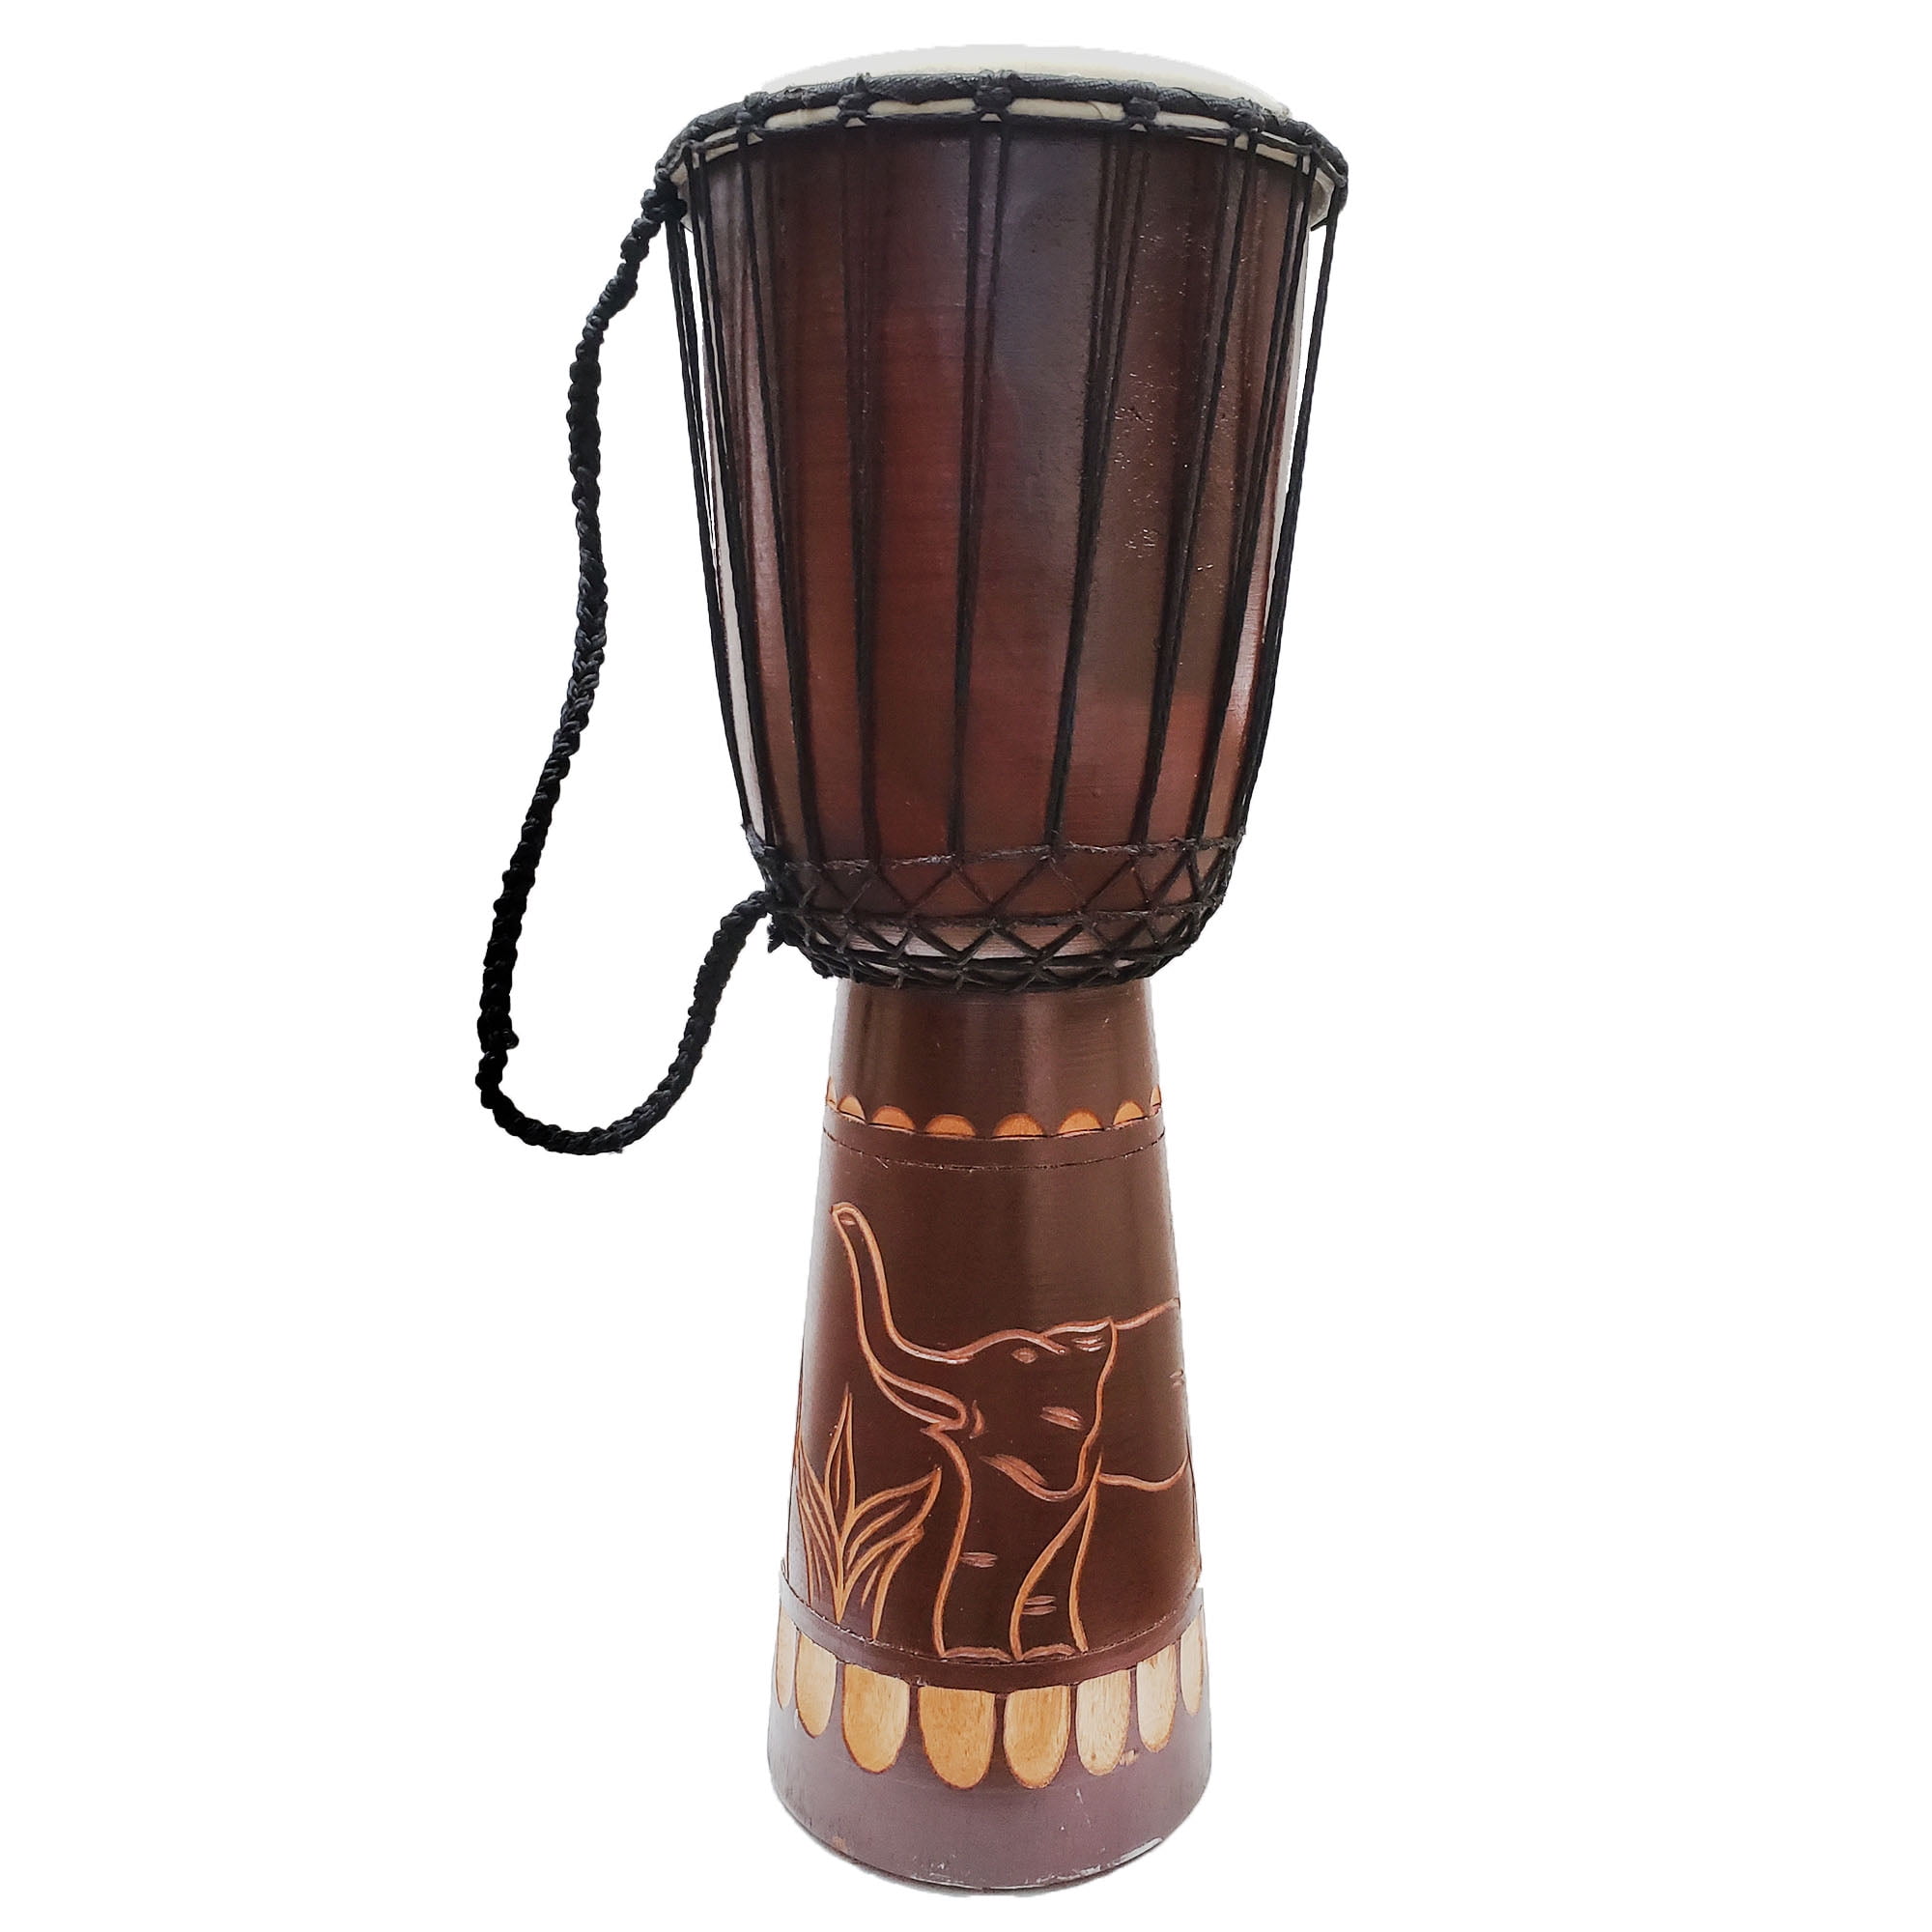 16 Inch, Elephant Djembe Drum Carved Bongo African inspired music beginners for kids and adults also a unique gifting idea Carver Abstract Elephant Giraffe Turtle. 